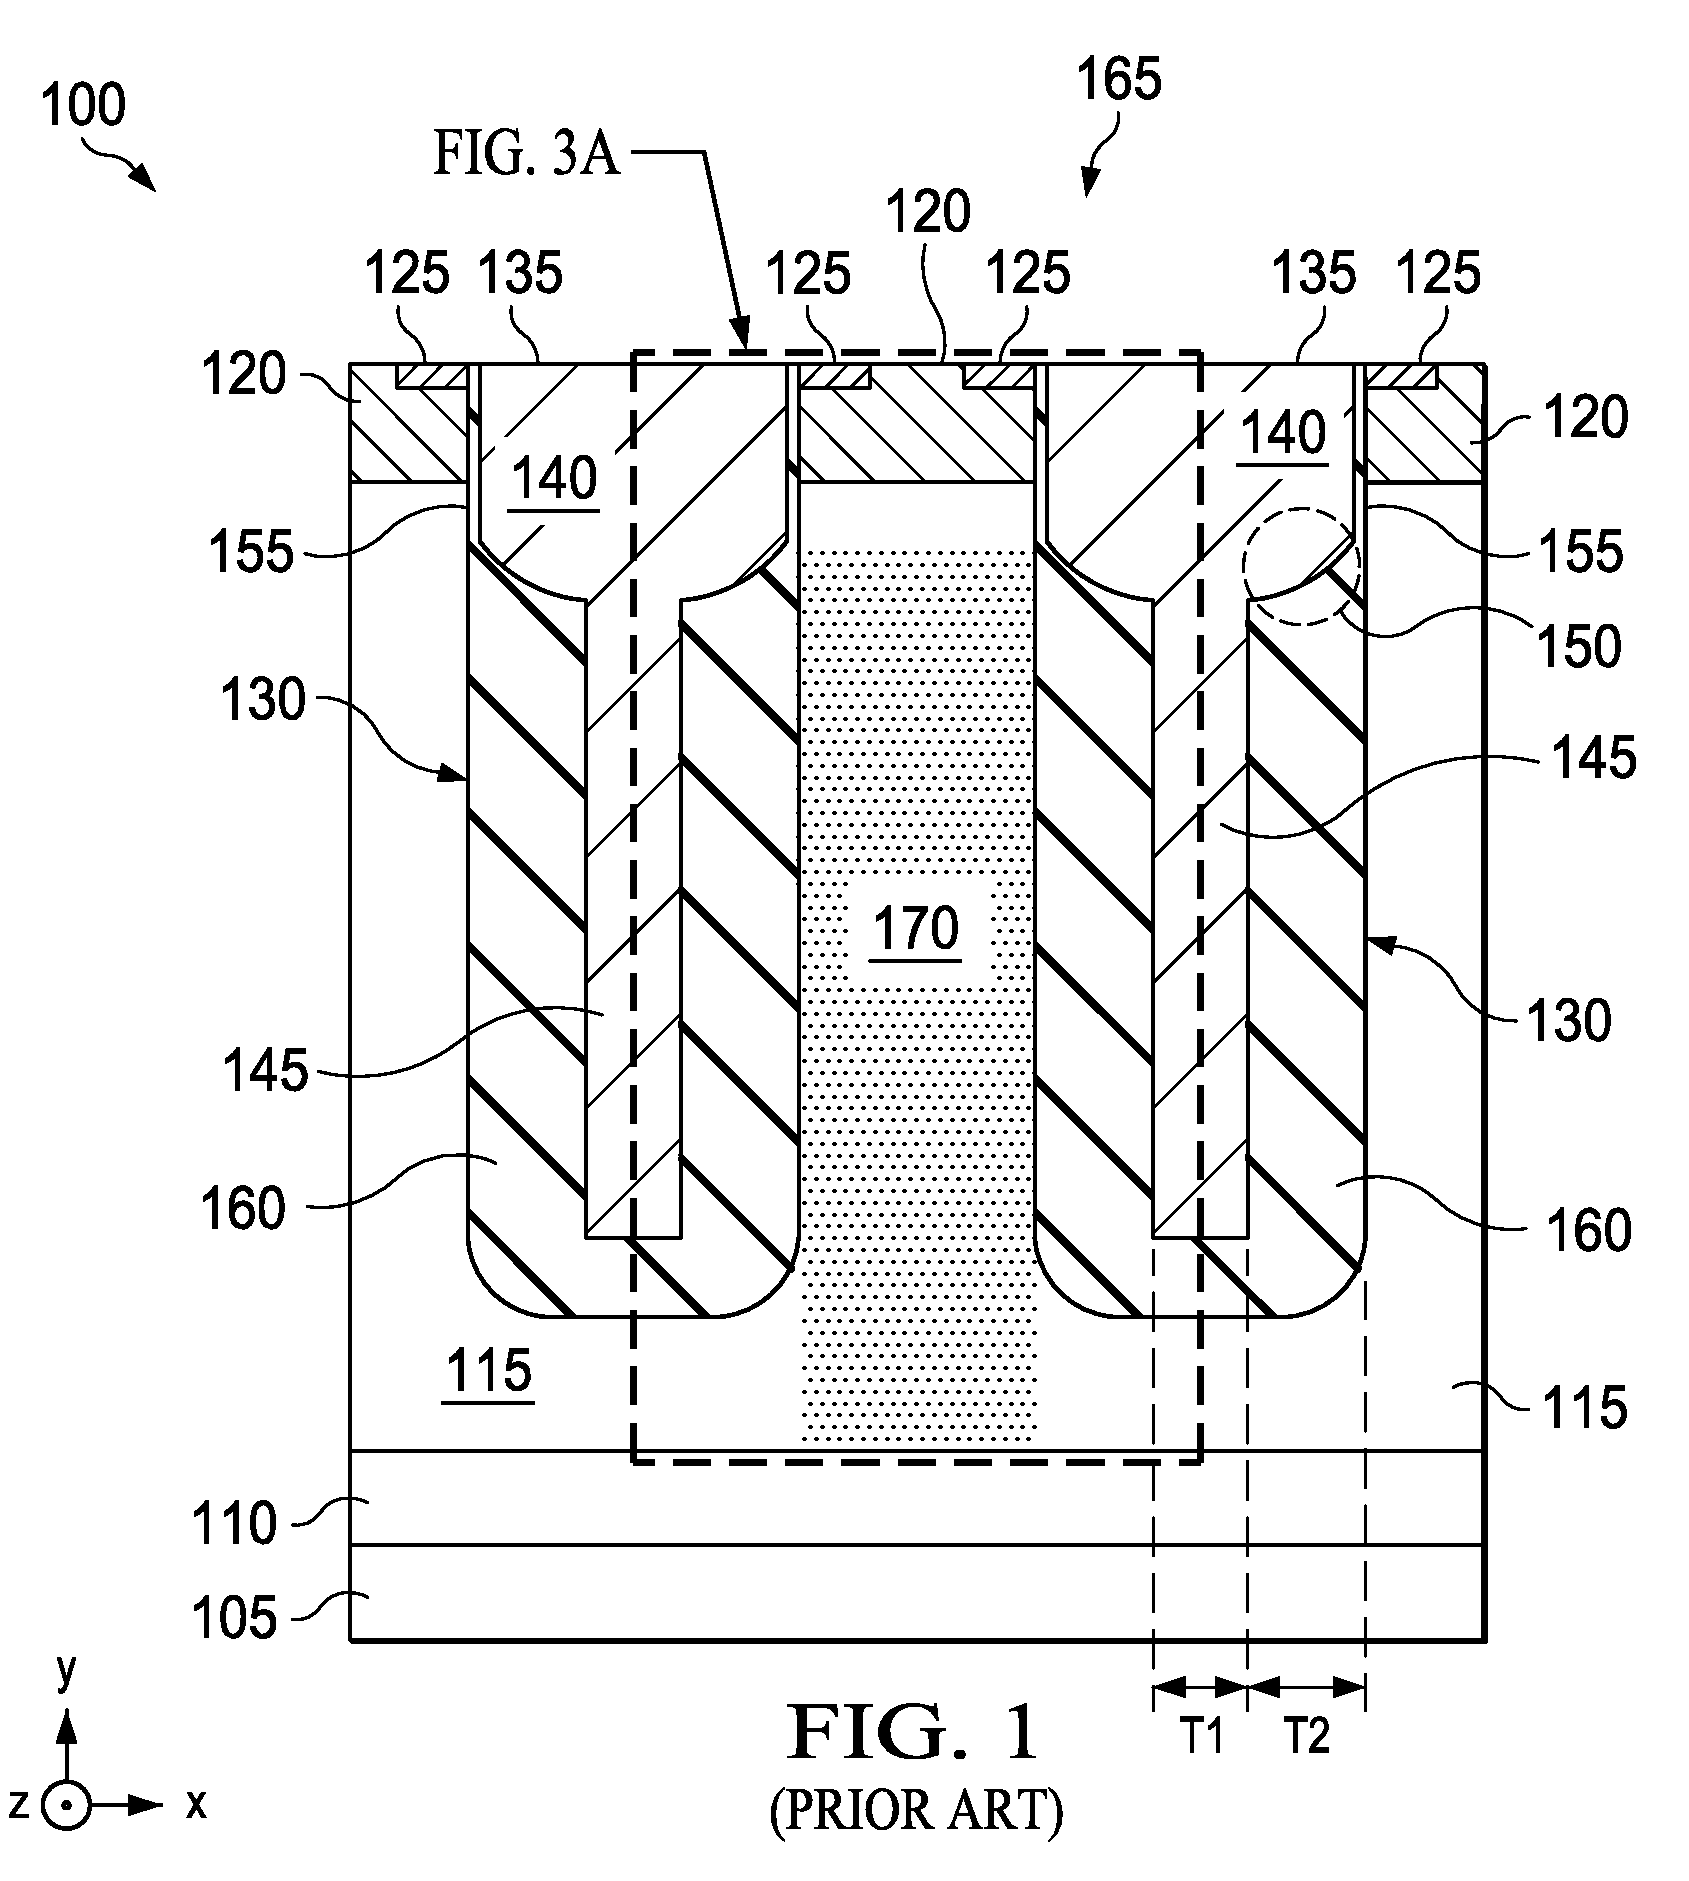 Field plate trench mosfet transistor with graded dielectric liner thickness